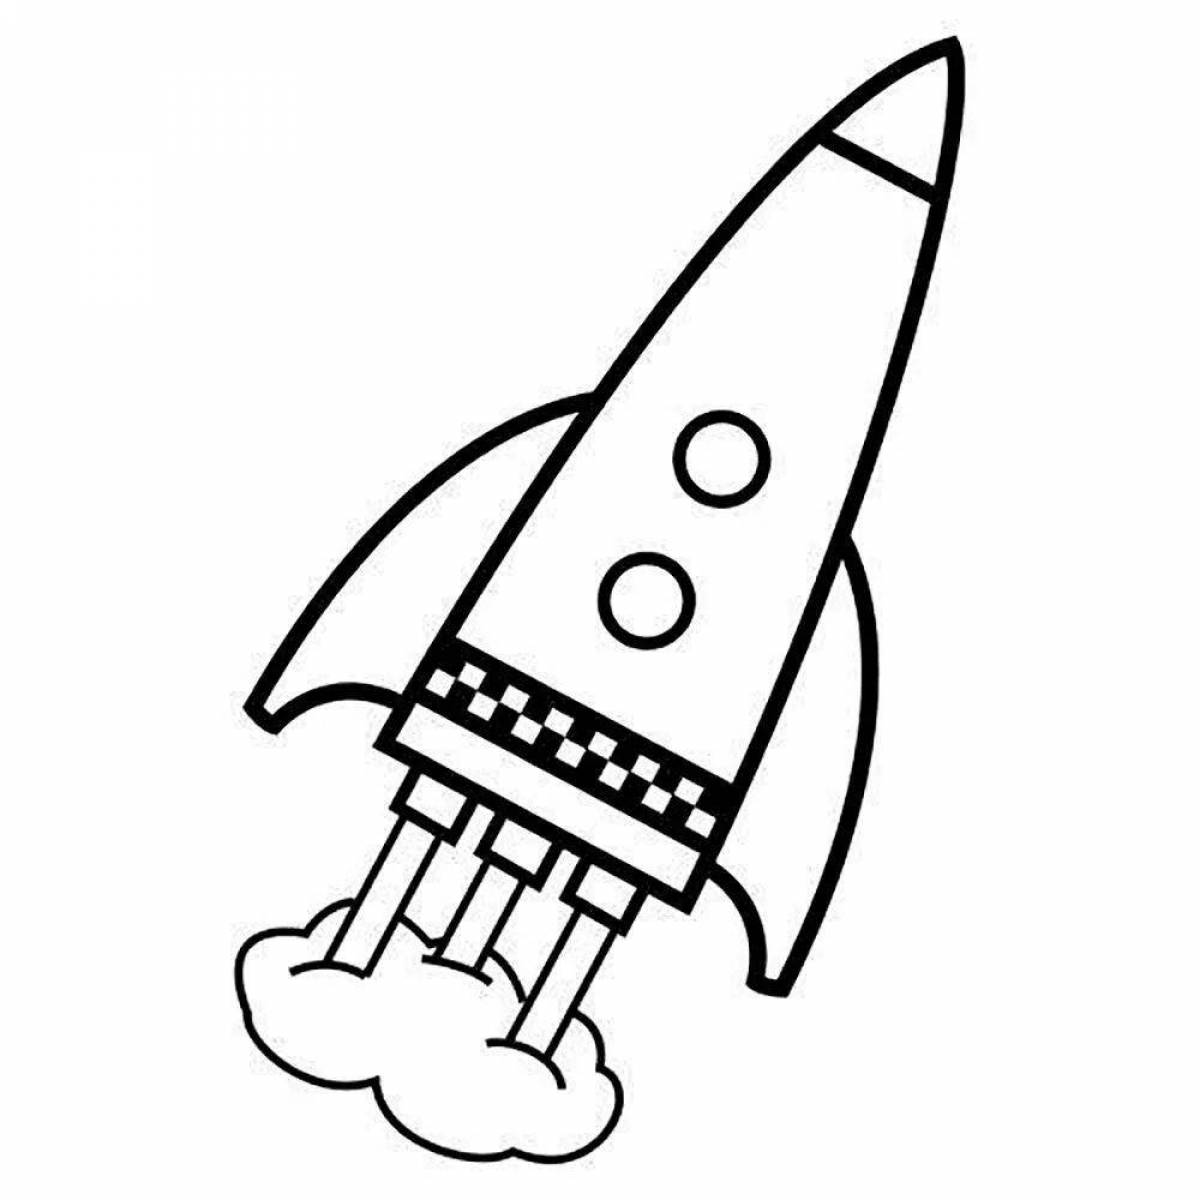 Great rocket coloring book for 3-4 year olds